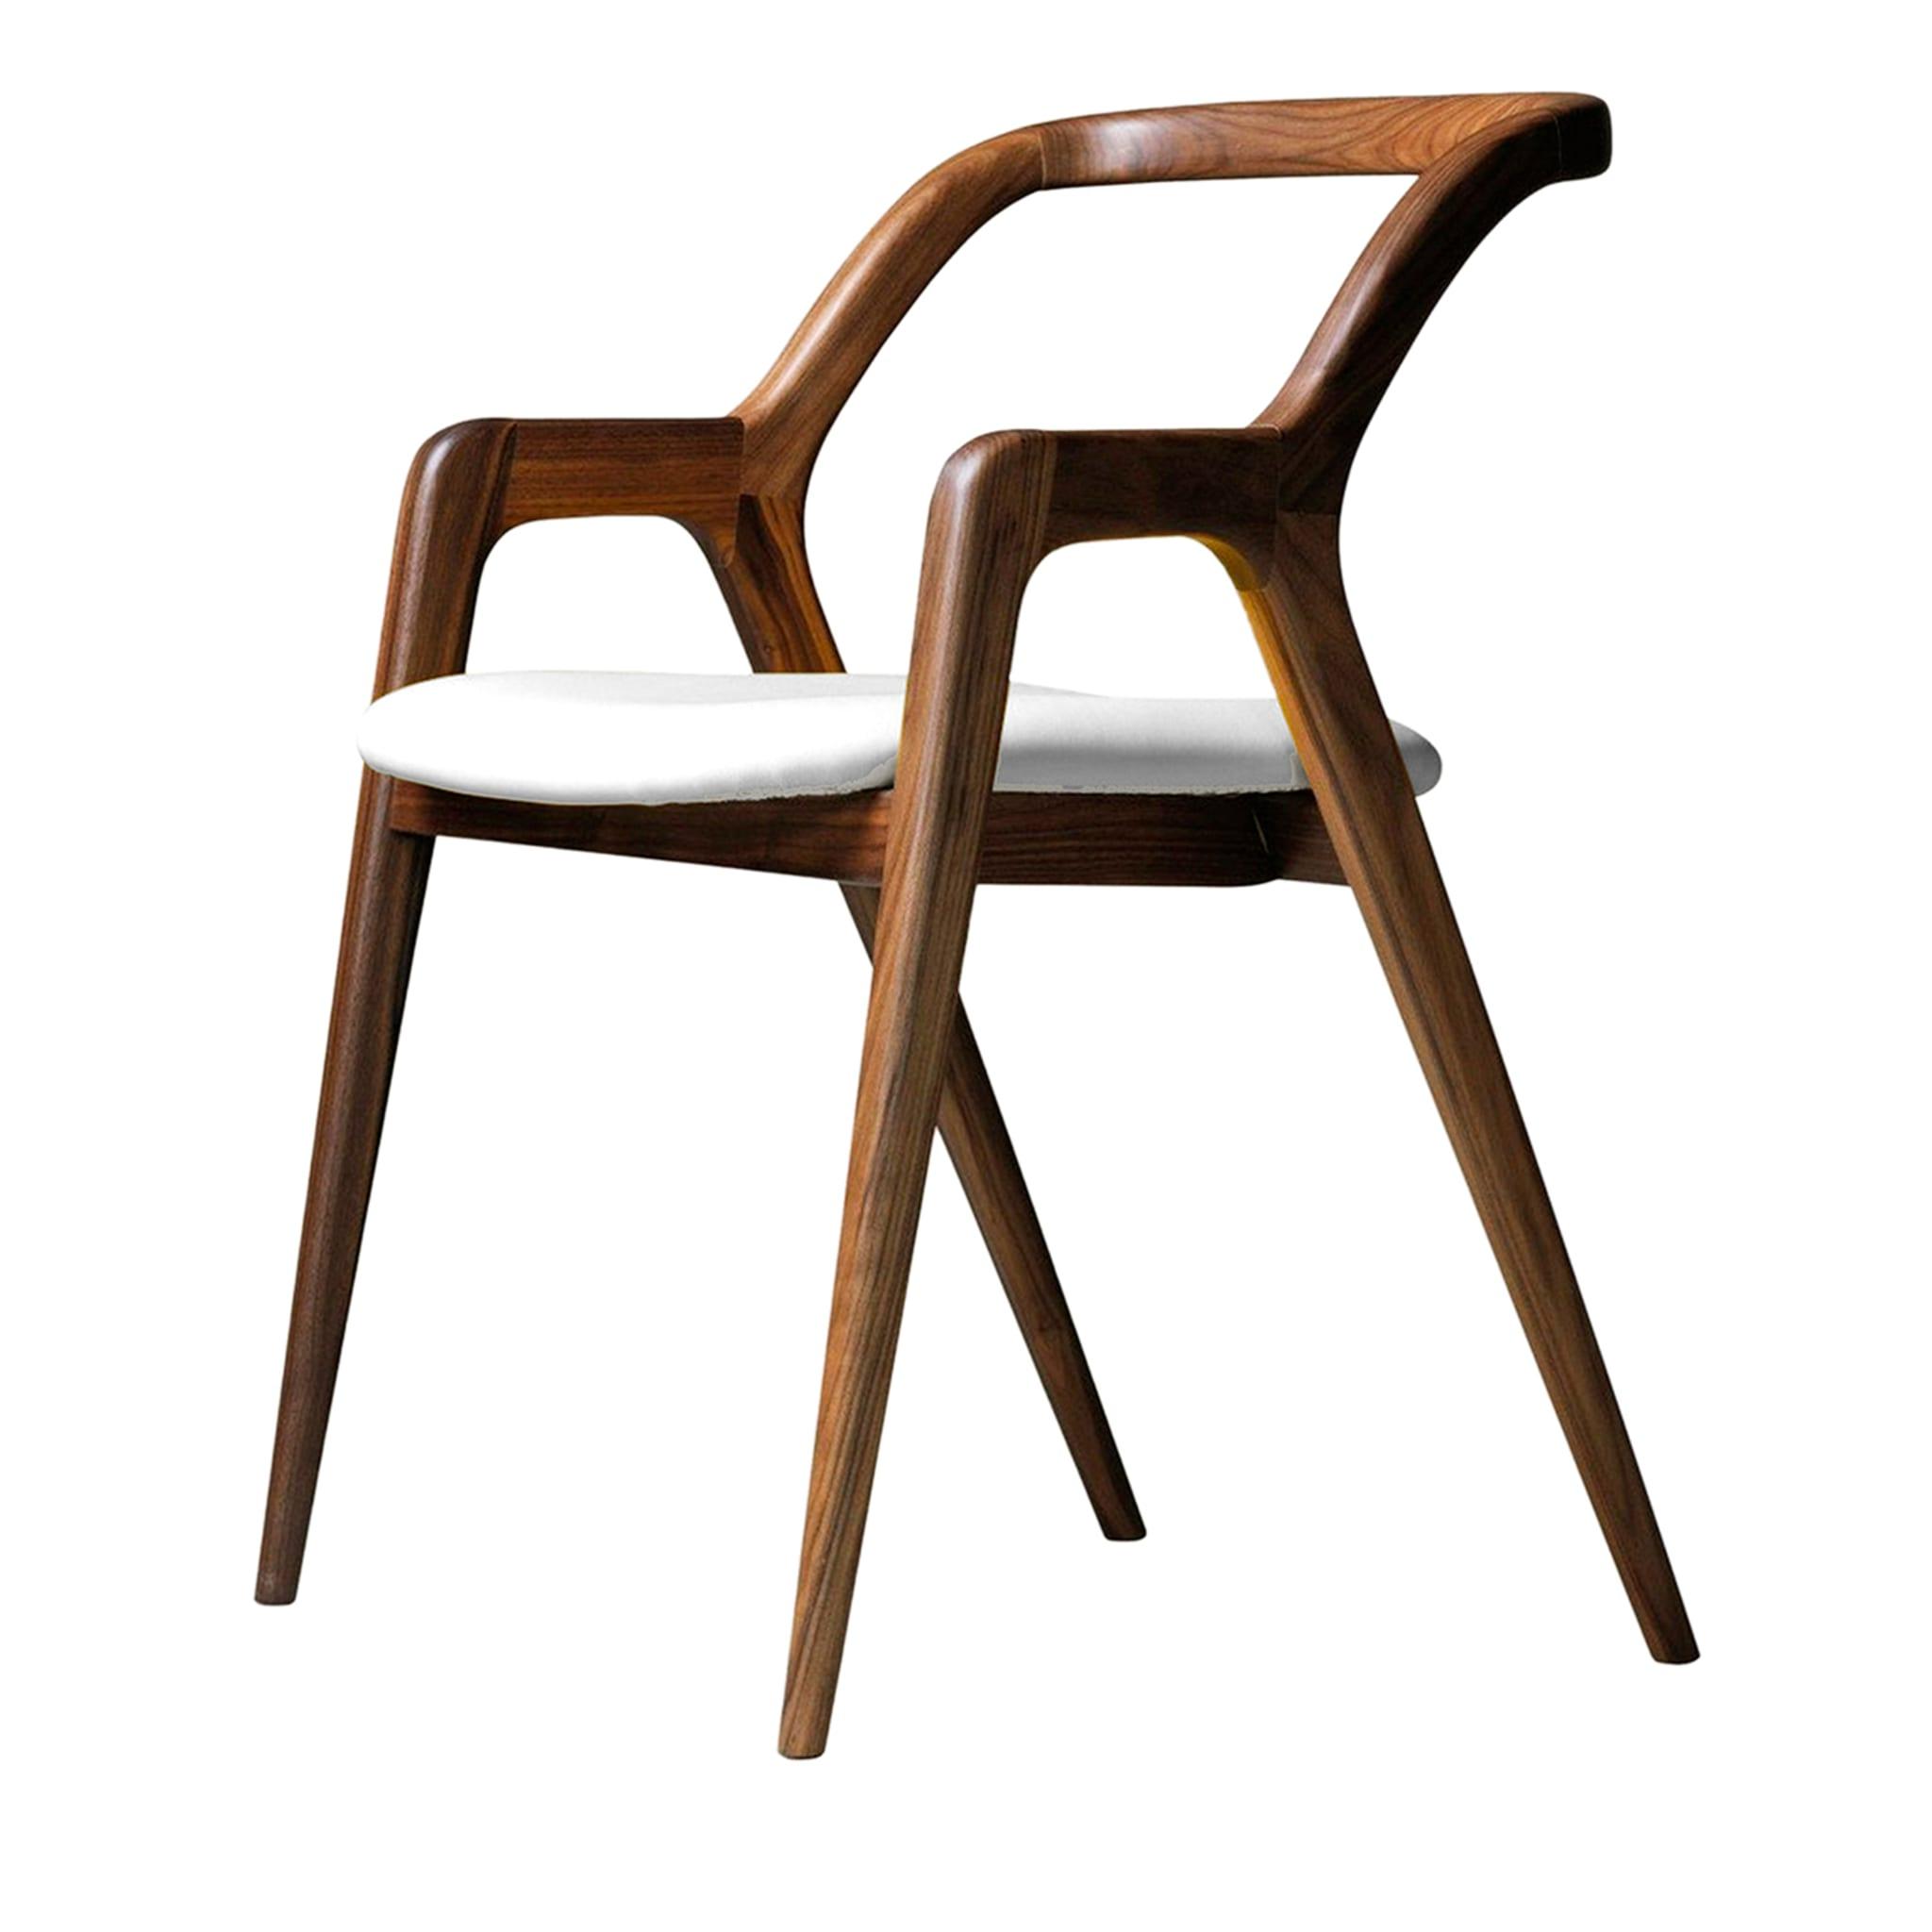 In Breve Natural Solid Walnut Chair ☞ Upholstery: Leather PANDORA 601